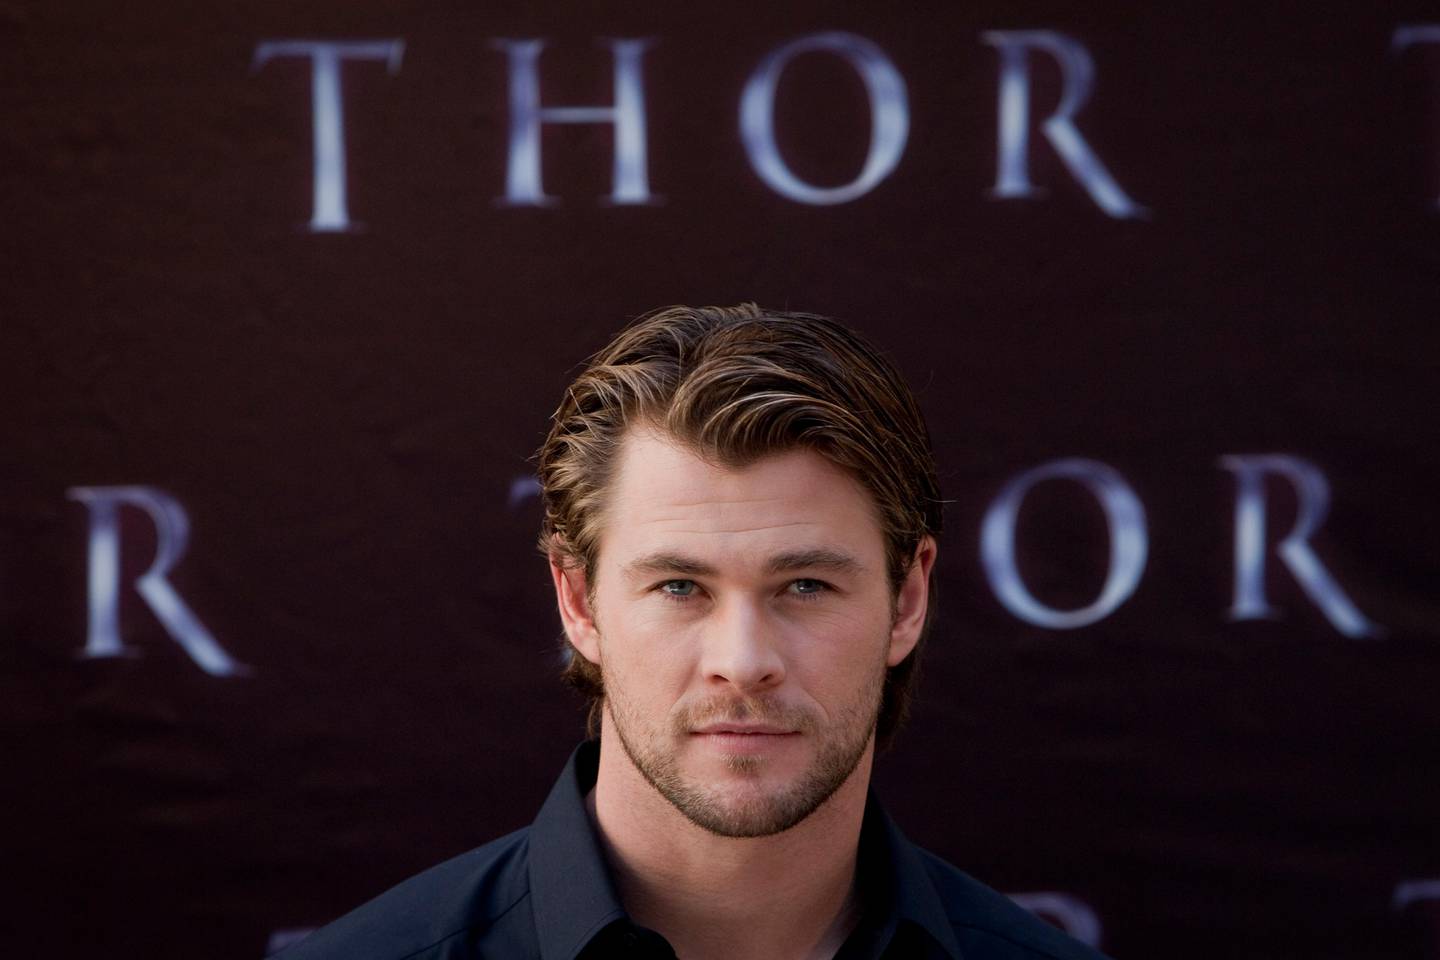 Actor Chris Hemsworth of Australia poses as he attends the photocall for the movie 'Thor' in Madrid, Thursday, April 14, 2011. (AP Photo/Arturo Rodriguez)